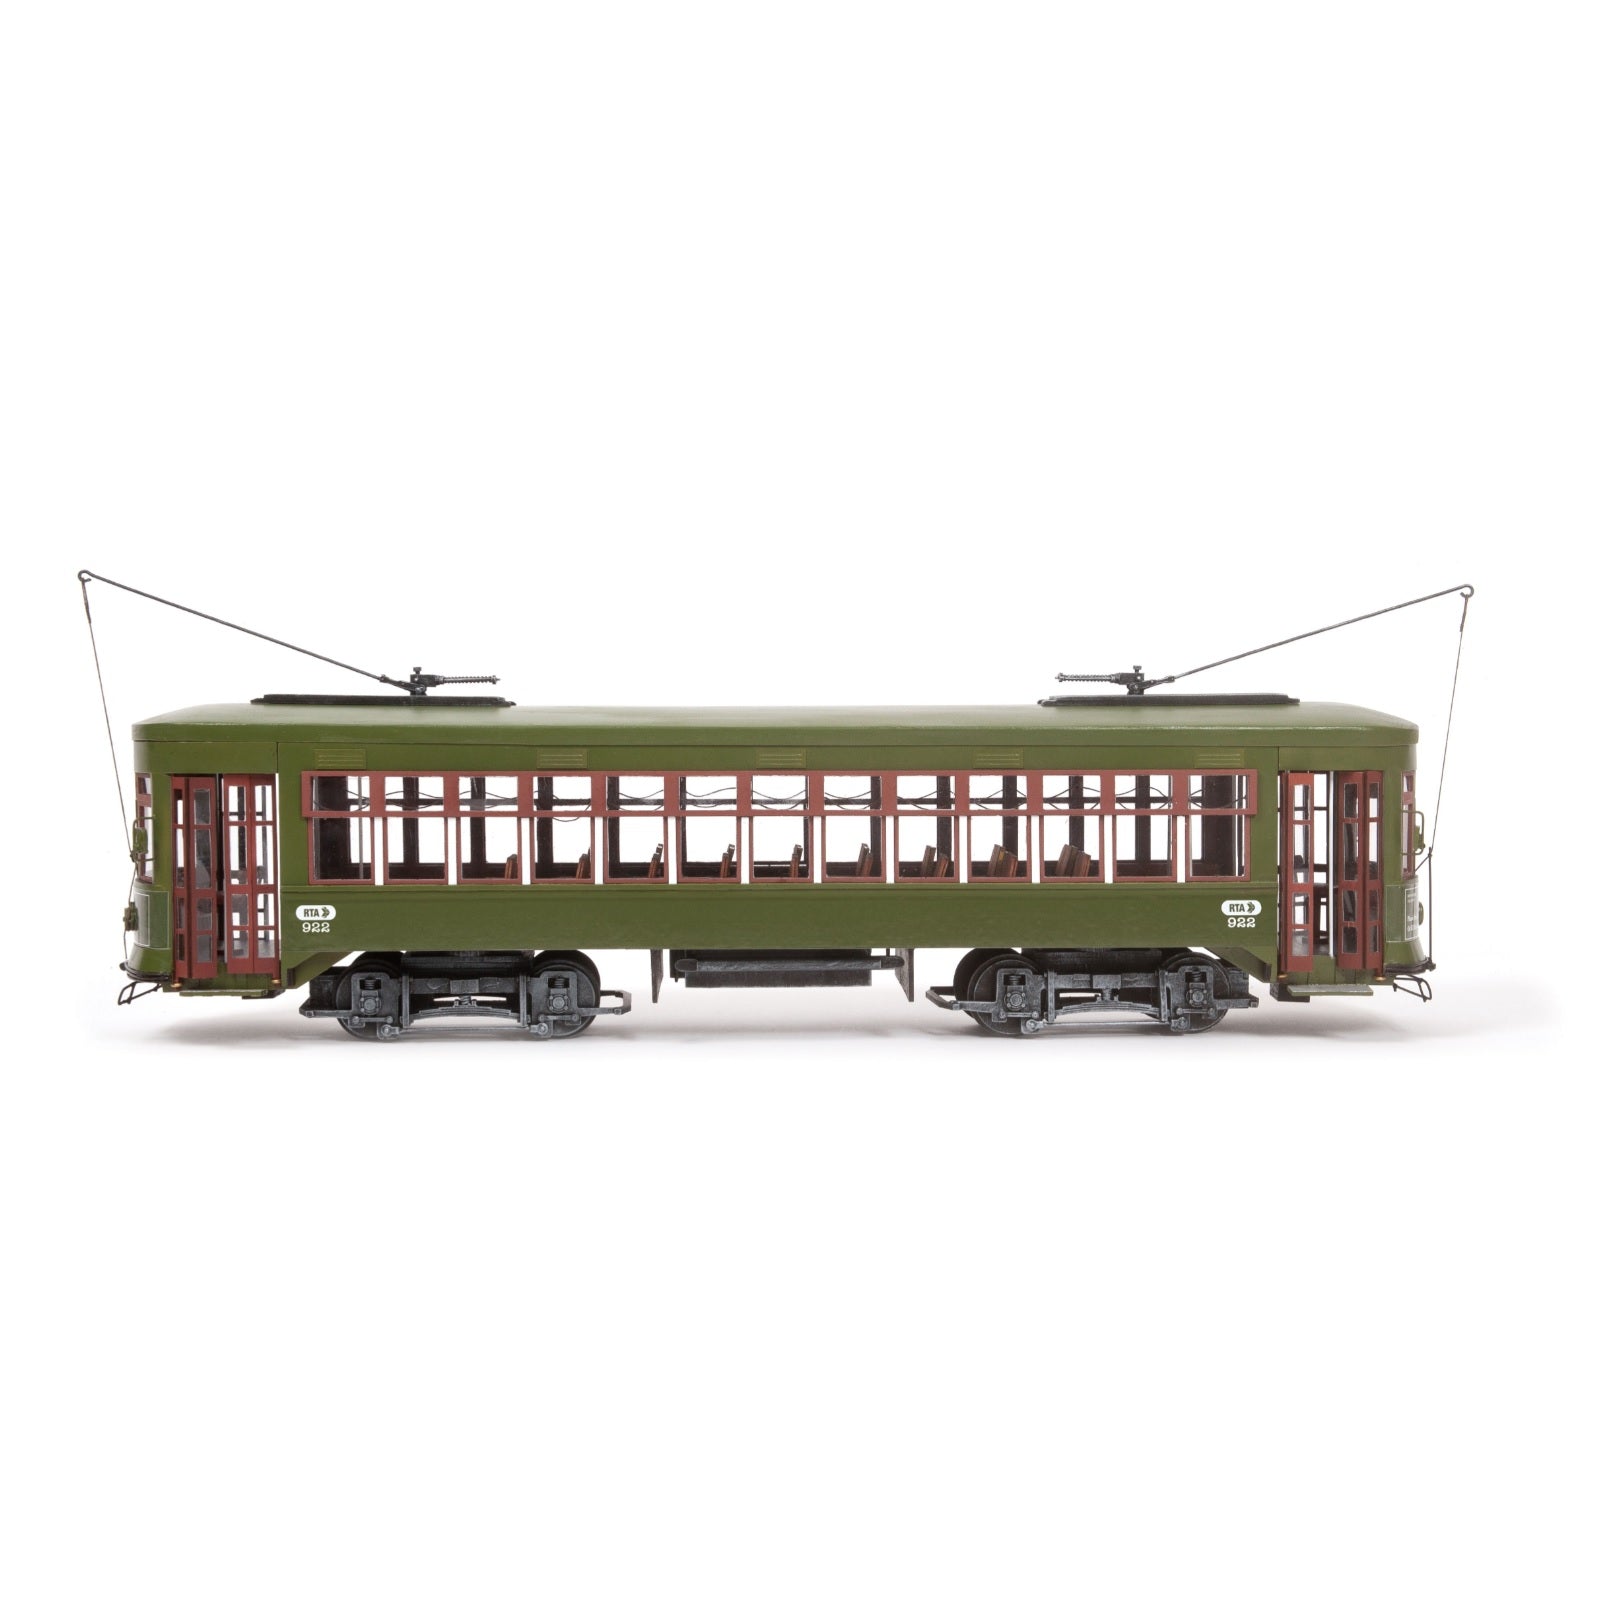 OcCre New Orleans Streetcar Model Kit, 1/24 Scale